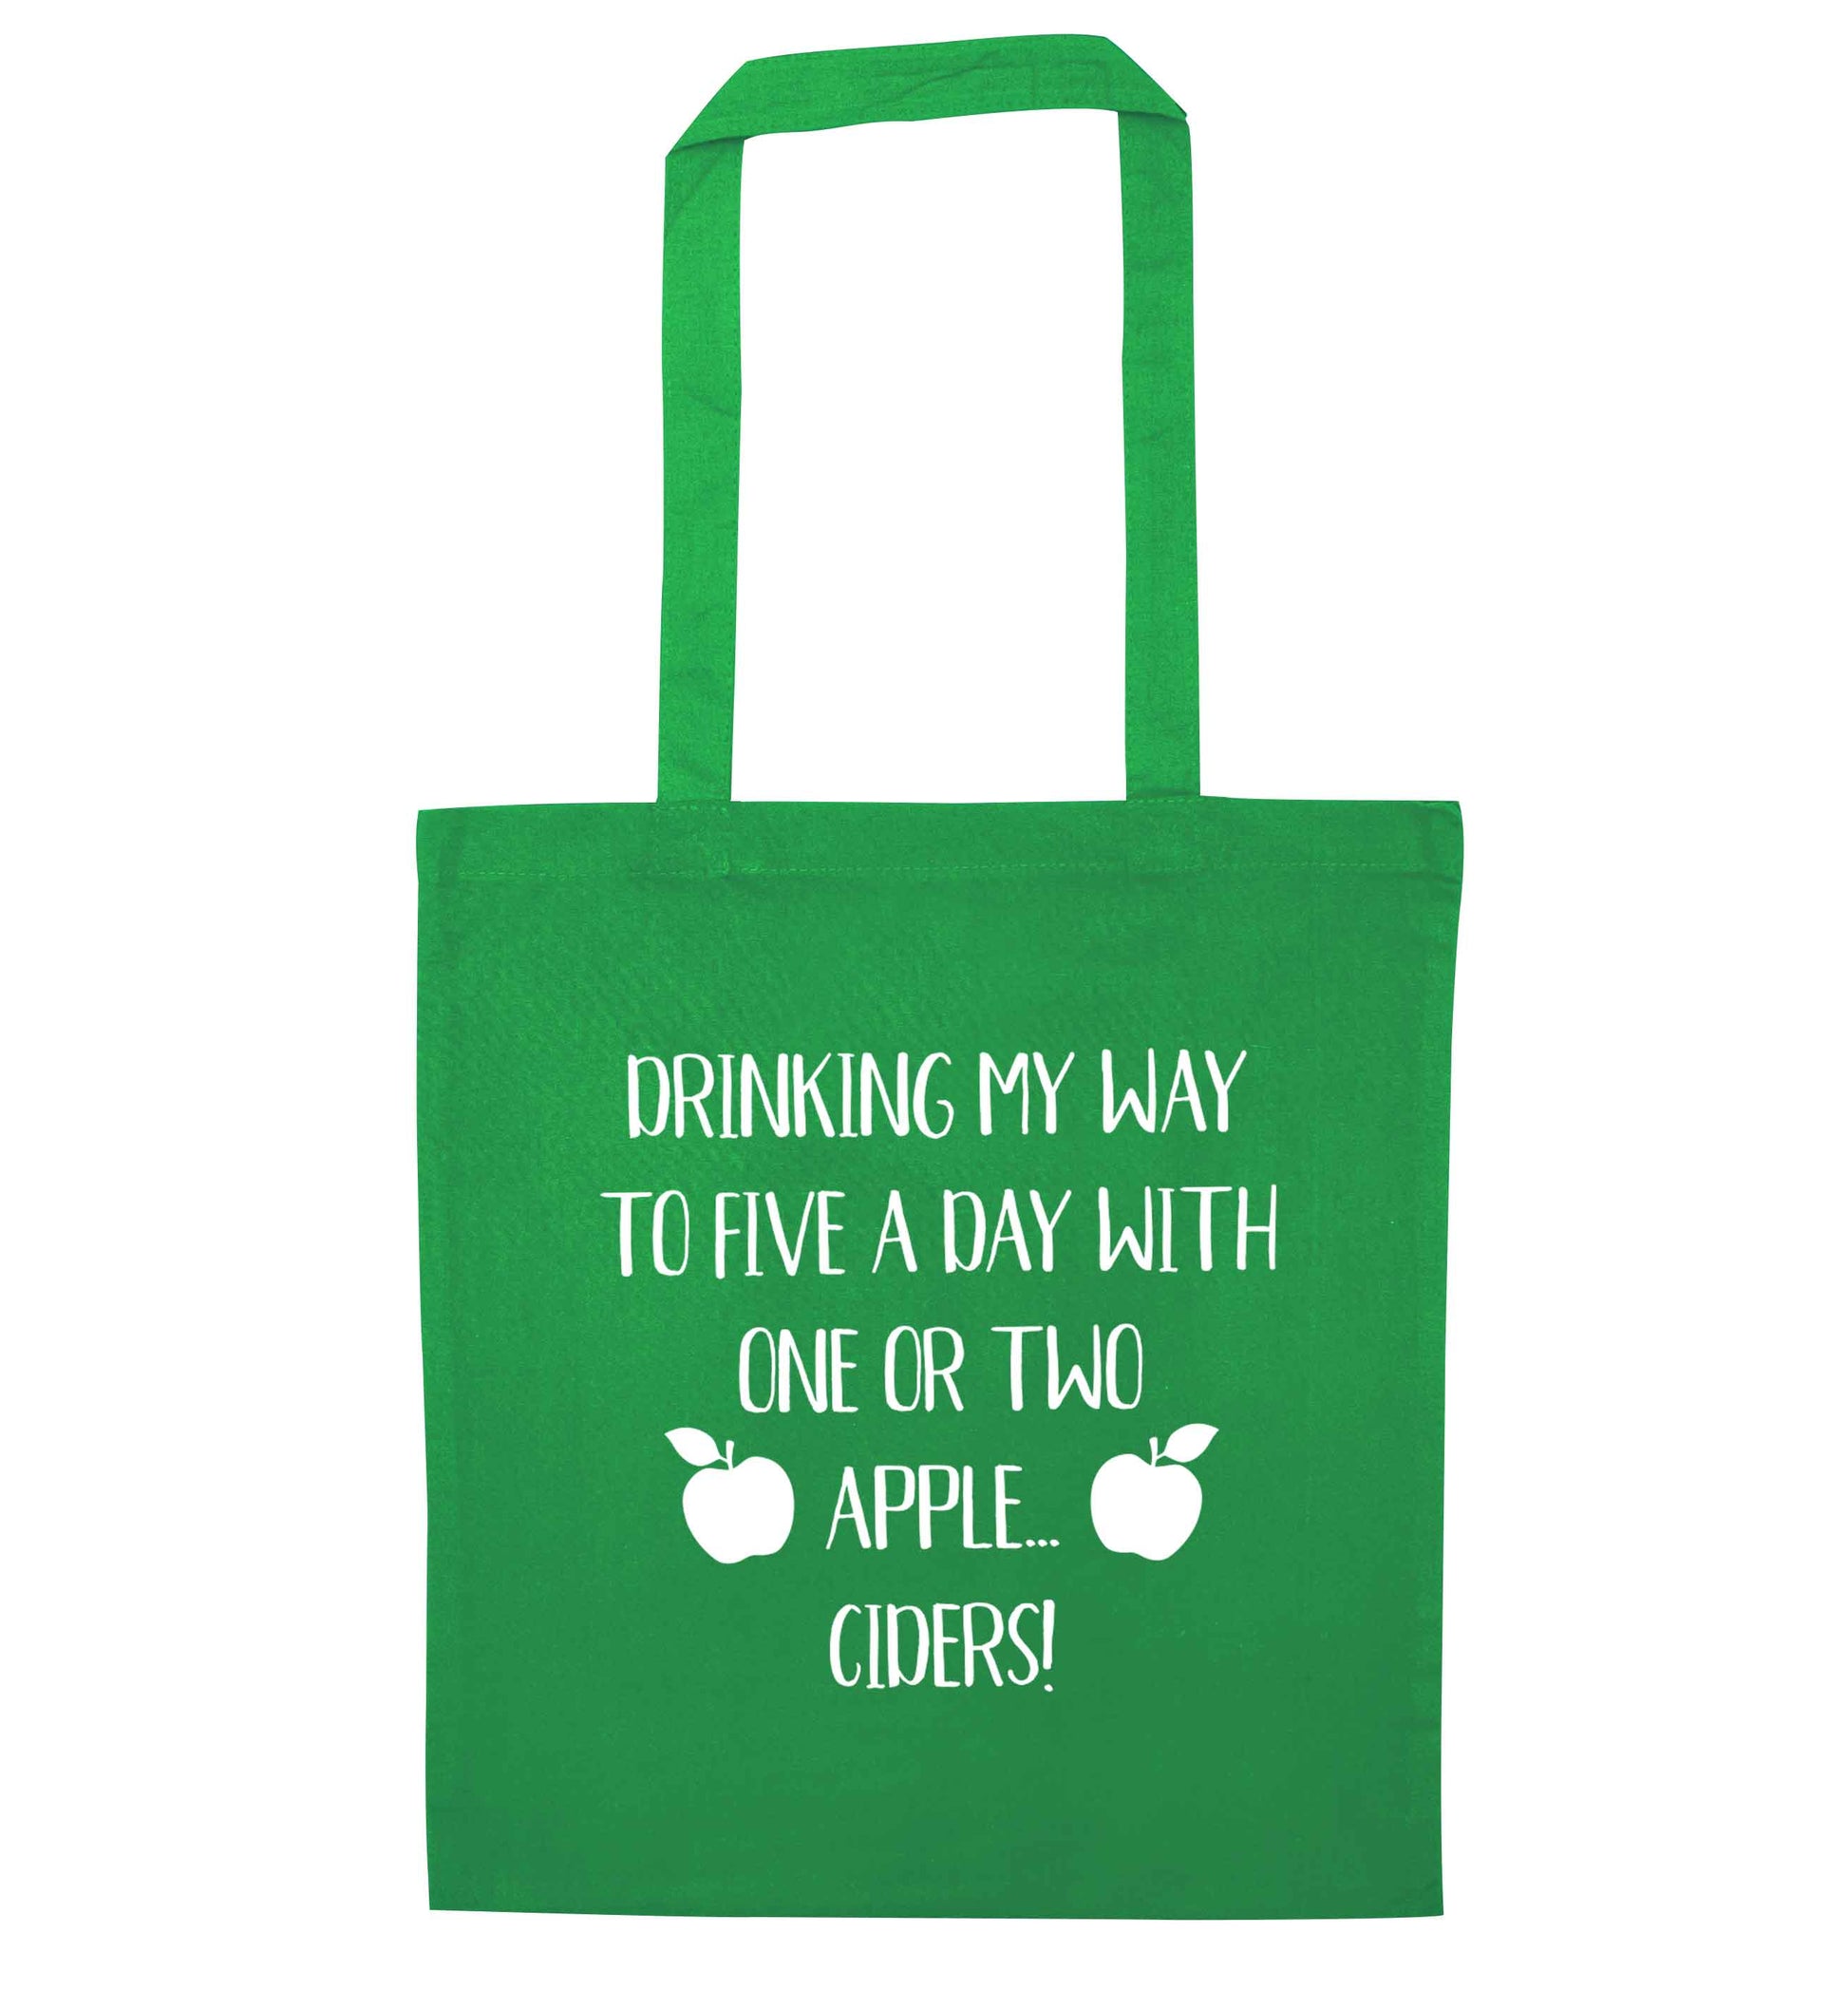 Drinking my way to five a day with one or two apple ciders green tote bag